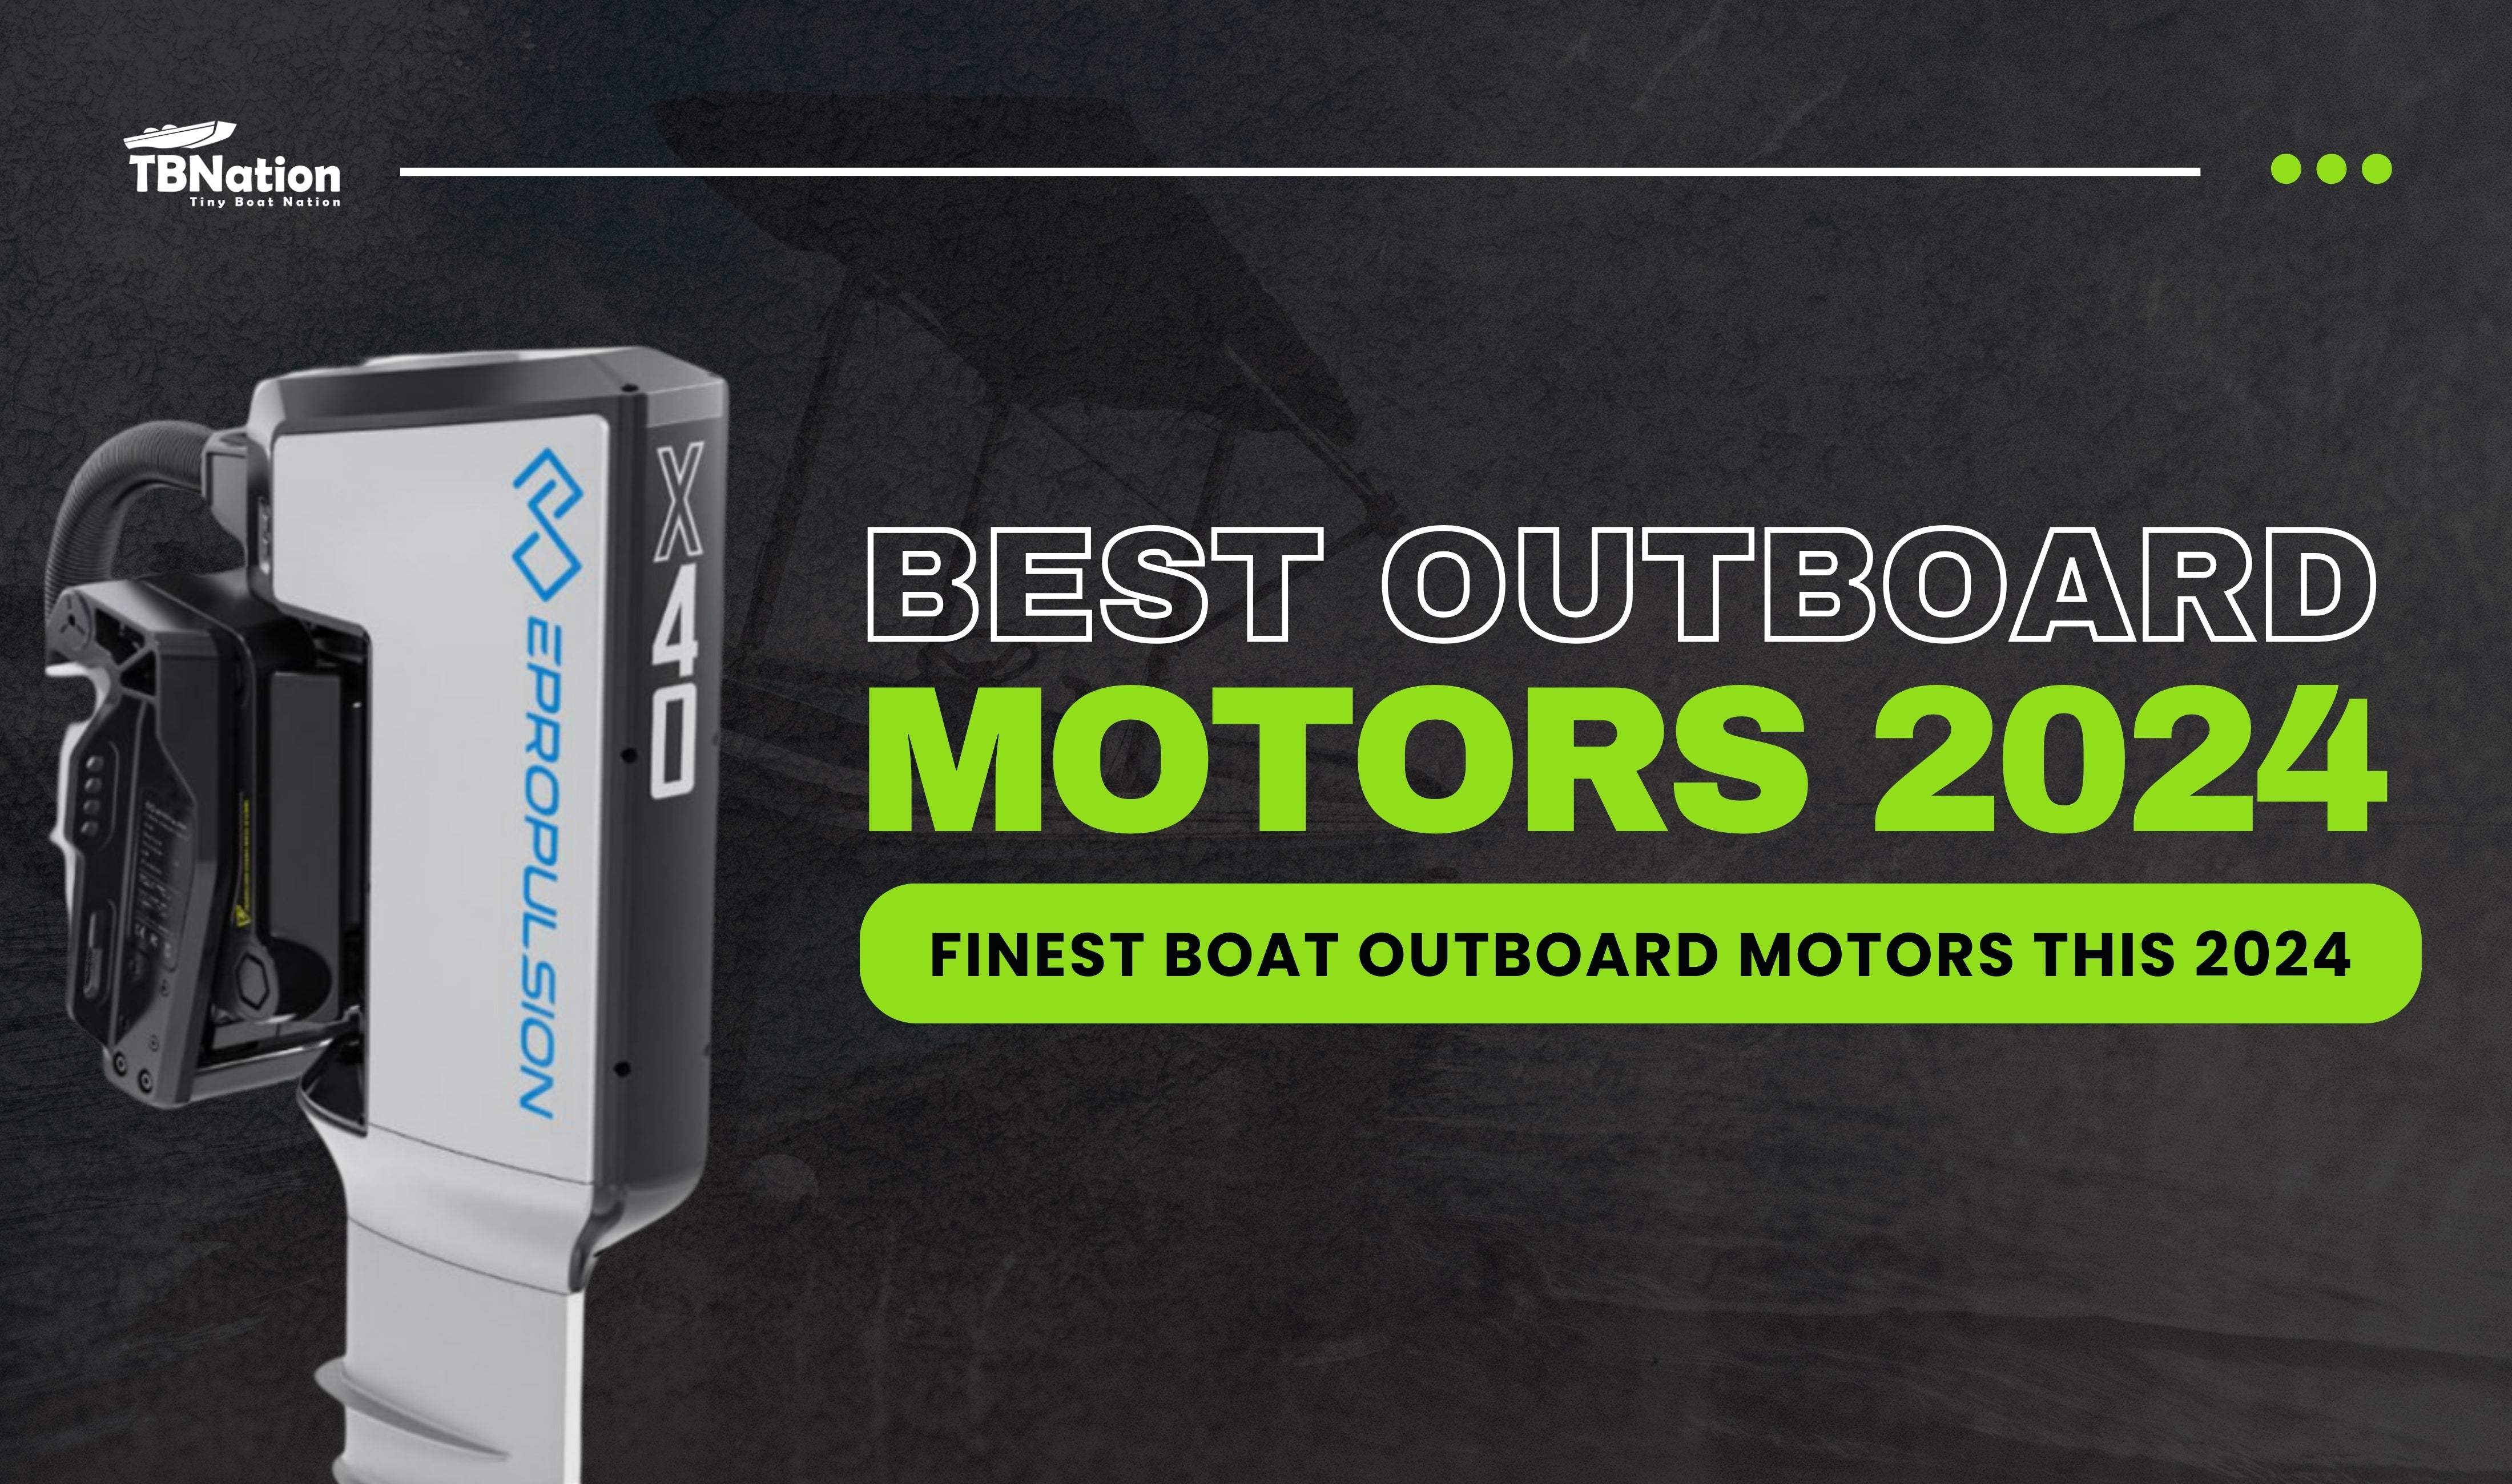 6 Tips to Follow When Choosing an Outboard Motor for Your Boat